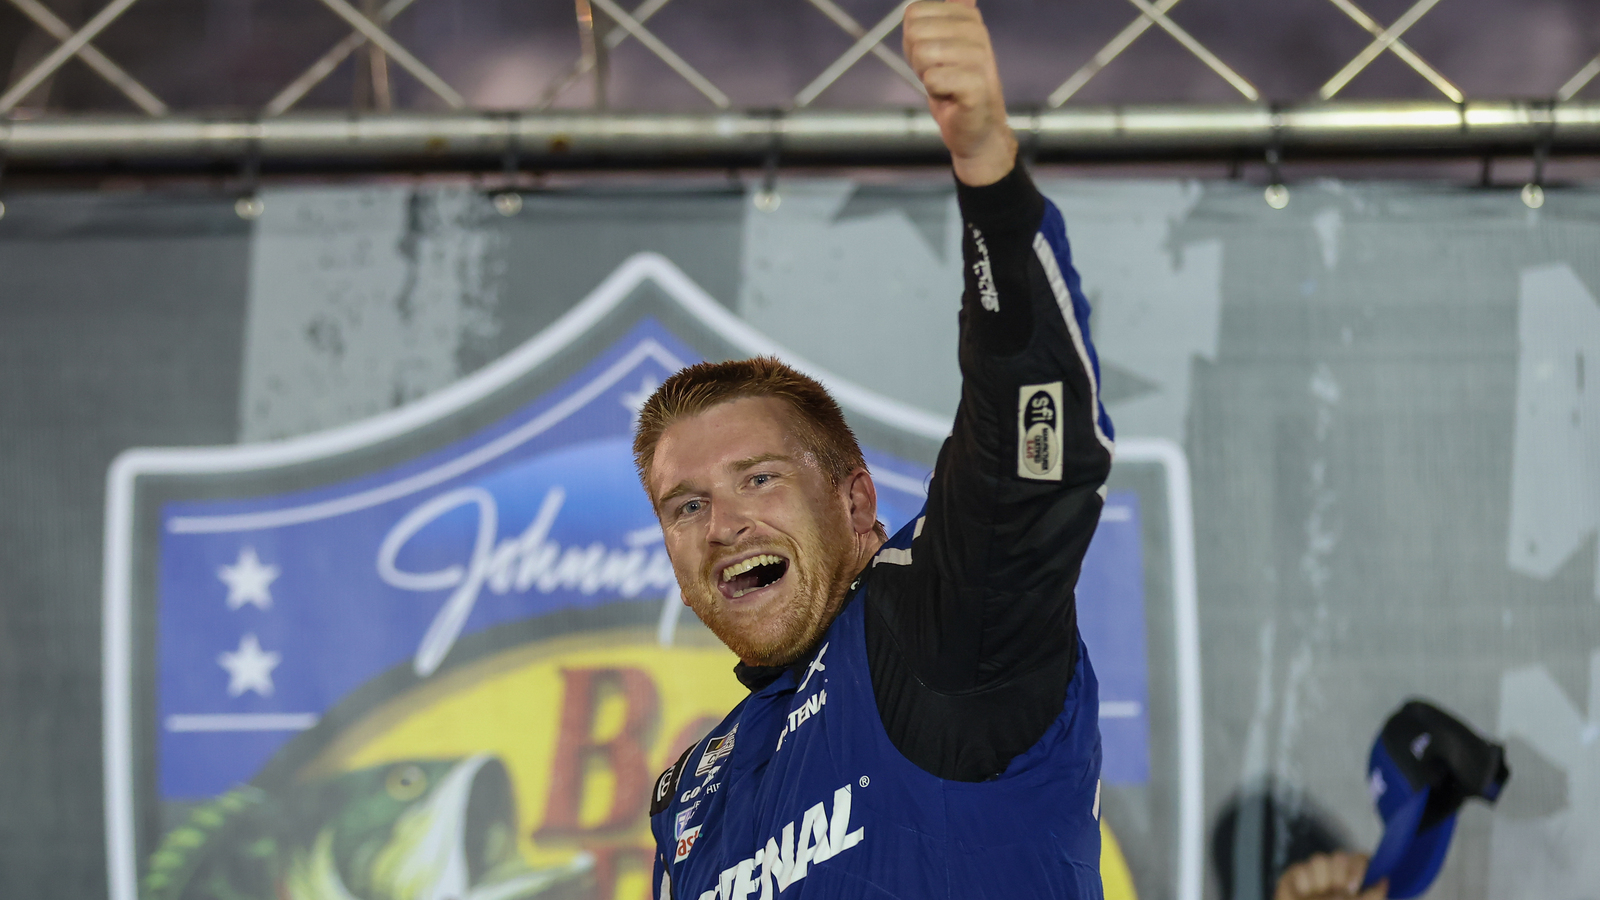 BUESCHER STILL IN DISBELIEF HE WON THE TRADITION-RICH BRISTOL NIGHT RACE, THE ONE HE SAID WAS AT THE TOP OF HIS LIST